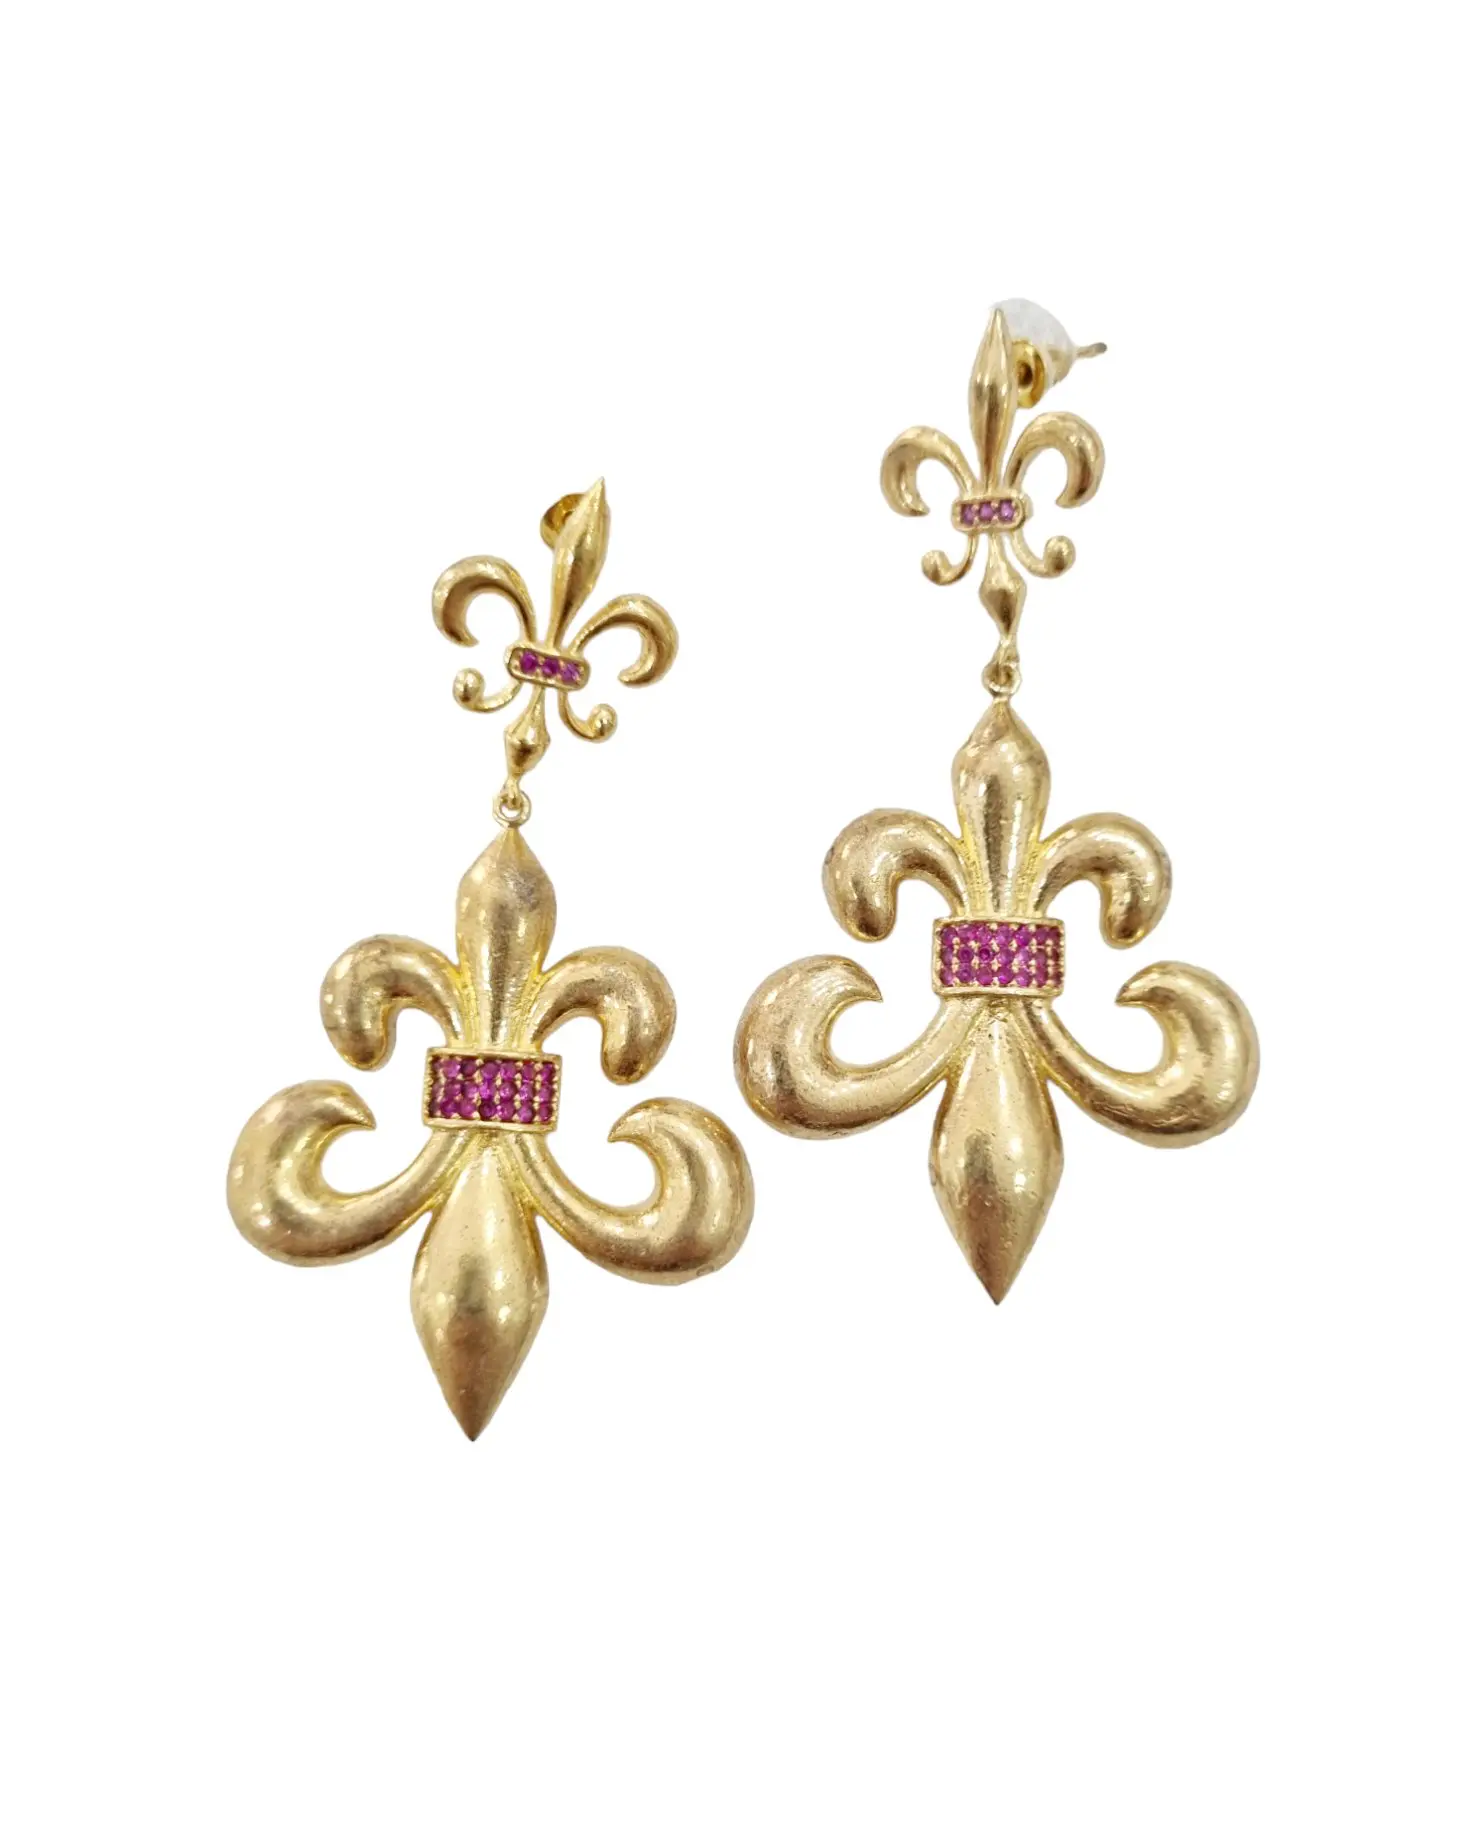 Lilies earrings made of brass and set with fuchsia zirconsLength 6.5cmWeight 7gr